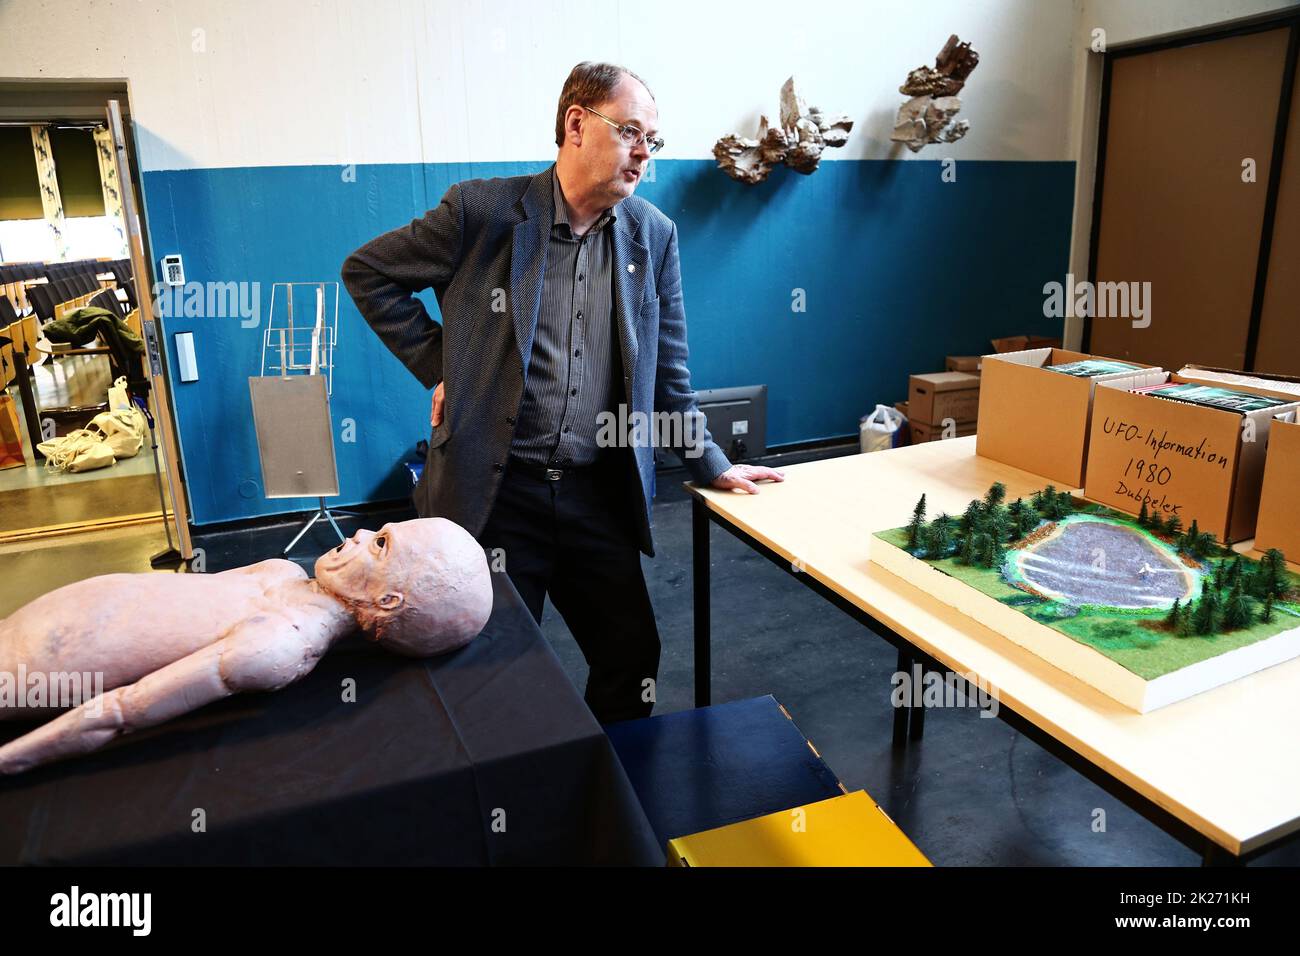 A UFO exhibition in Linköping, Sweden. It is the National Organization 'UFO-Sverige' that has a national meeting. The chairman is DN journalist Clas Svahn (in the picture), who is a long-time UFO researcher in Sweden. Stock Photo